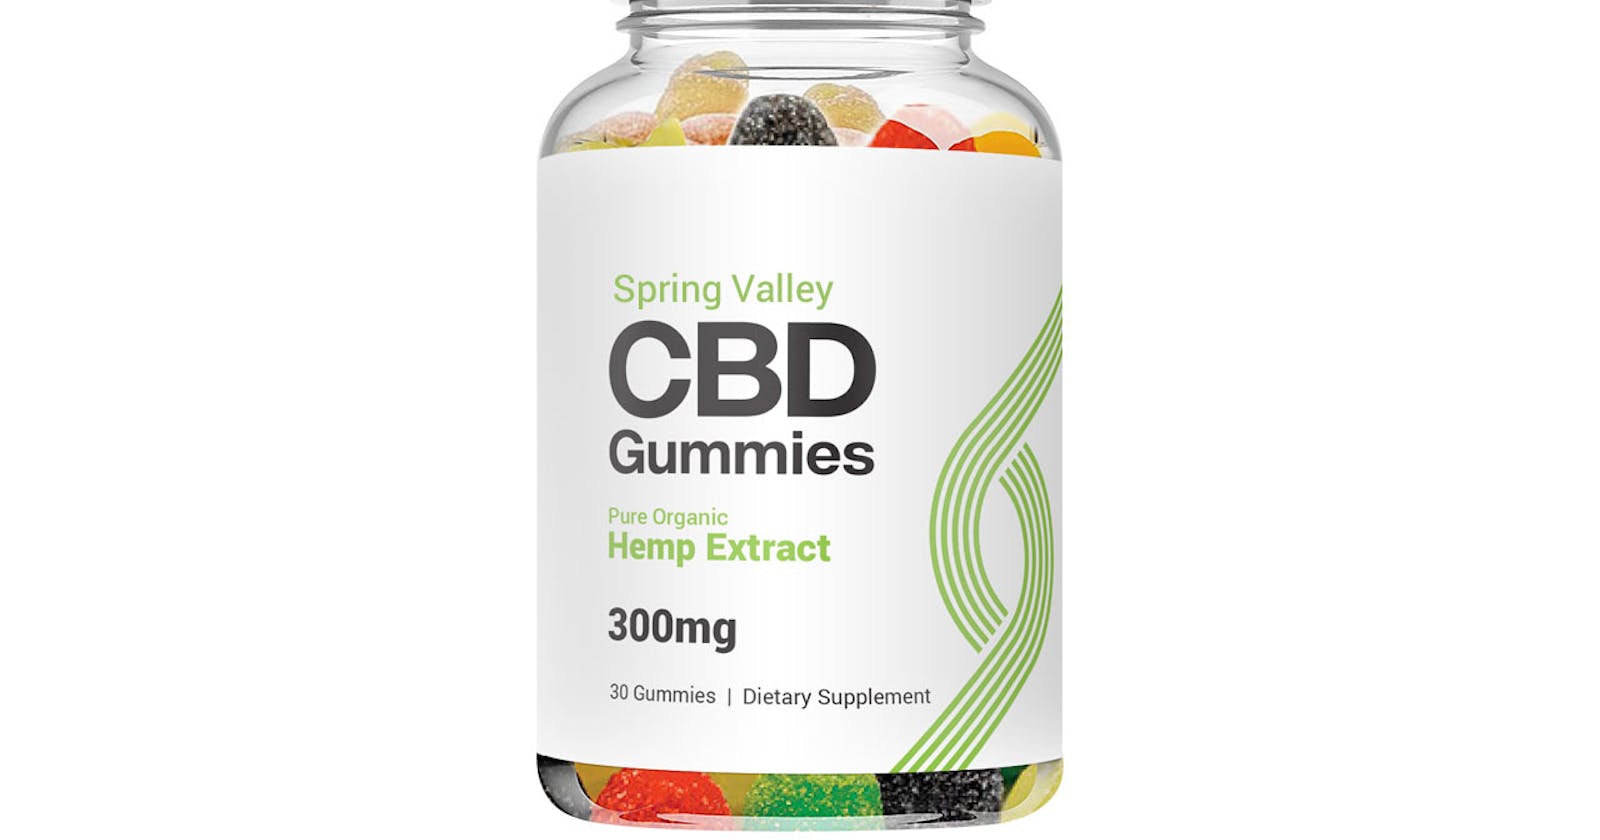 Spring Valley CBD Gummies [REAL OR HOAX] Does it Really Works?